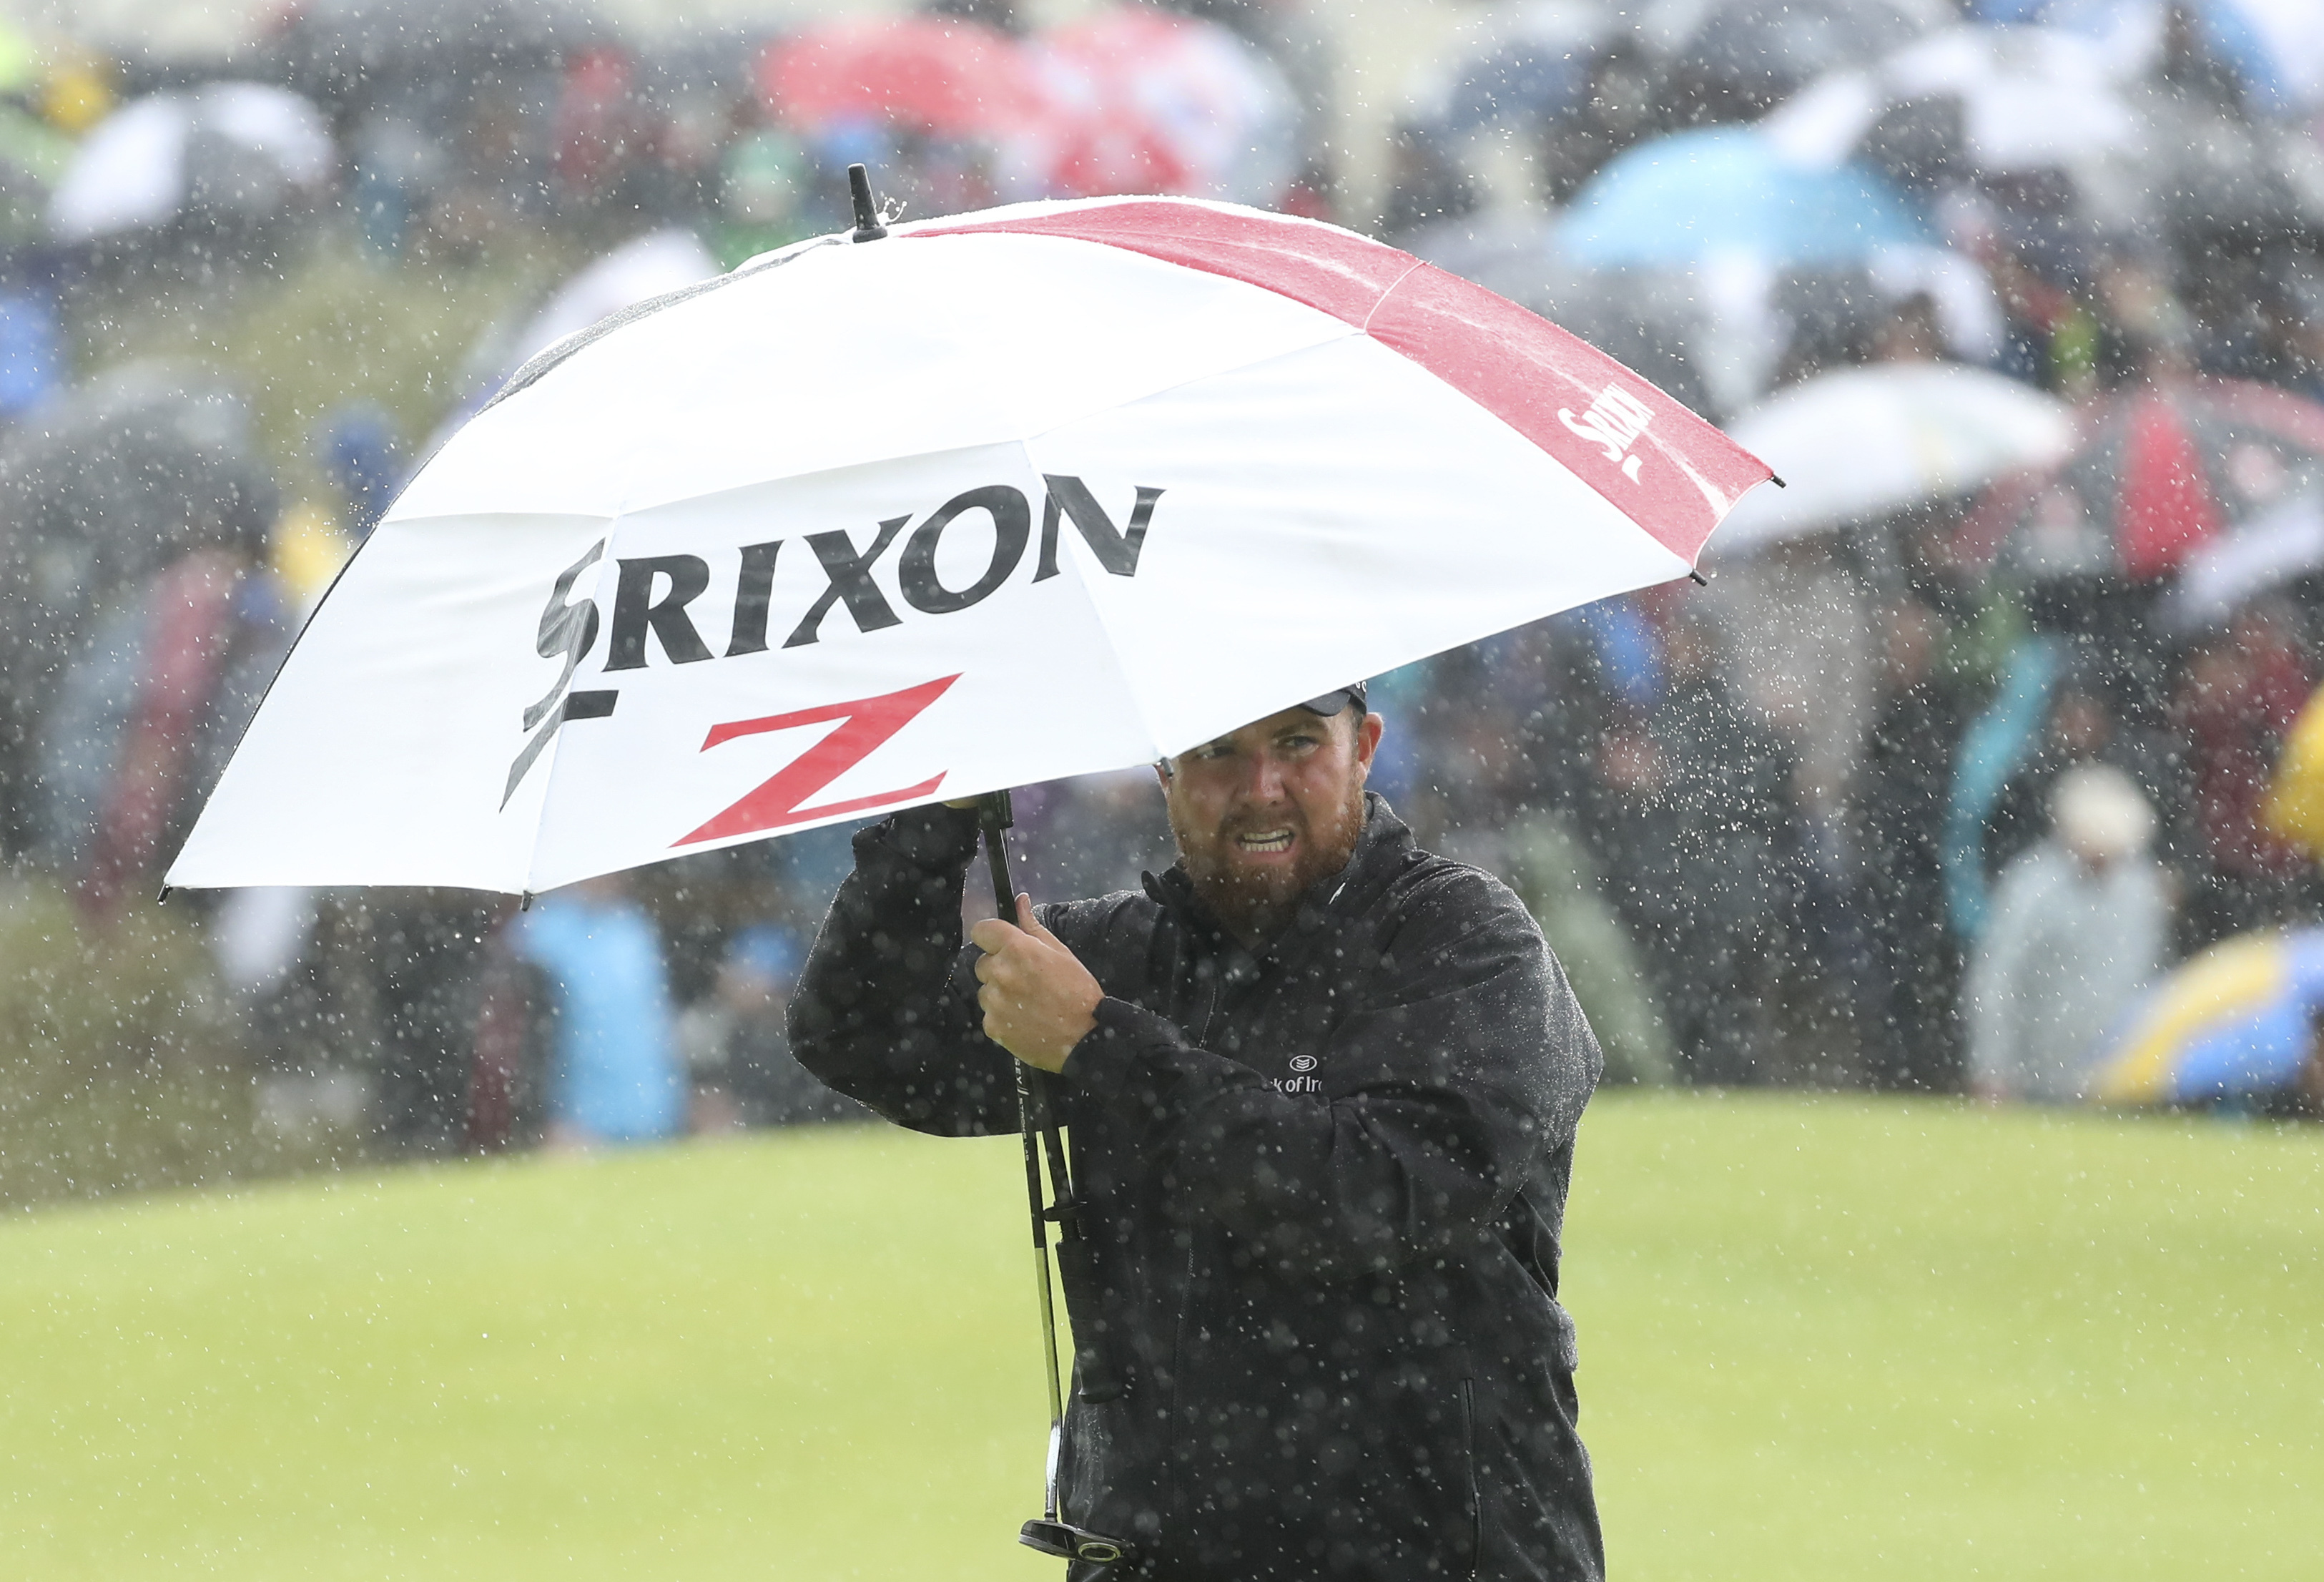 Bad weather leads to some high scores at British Open